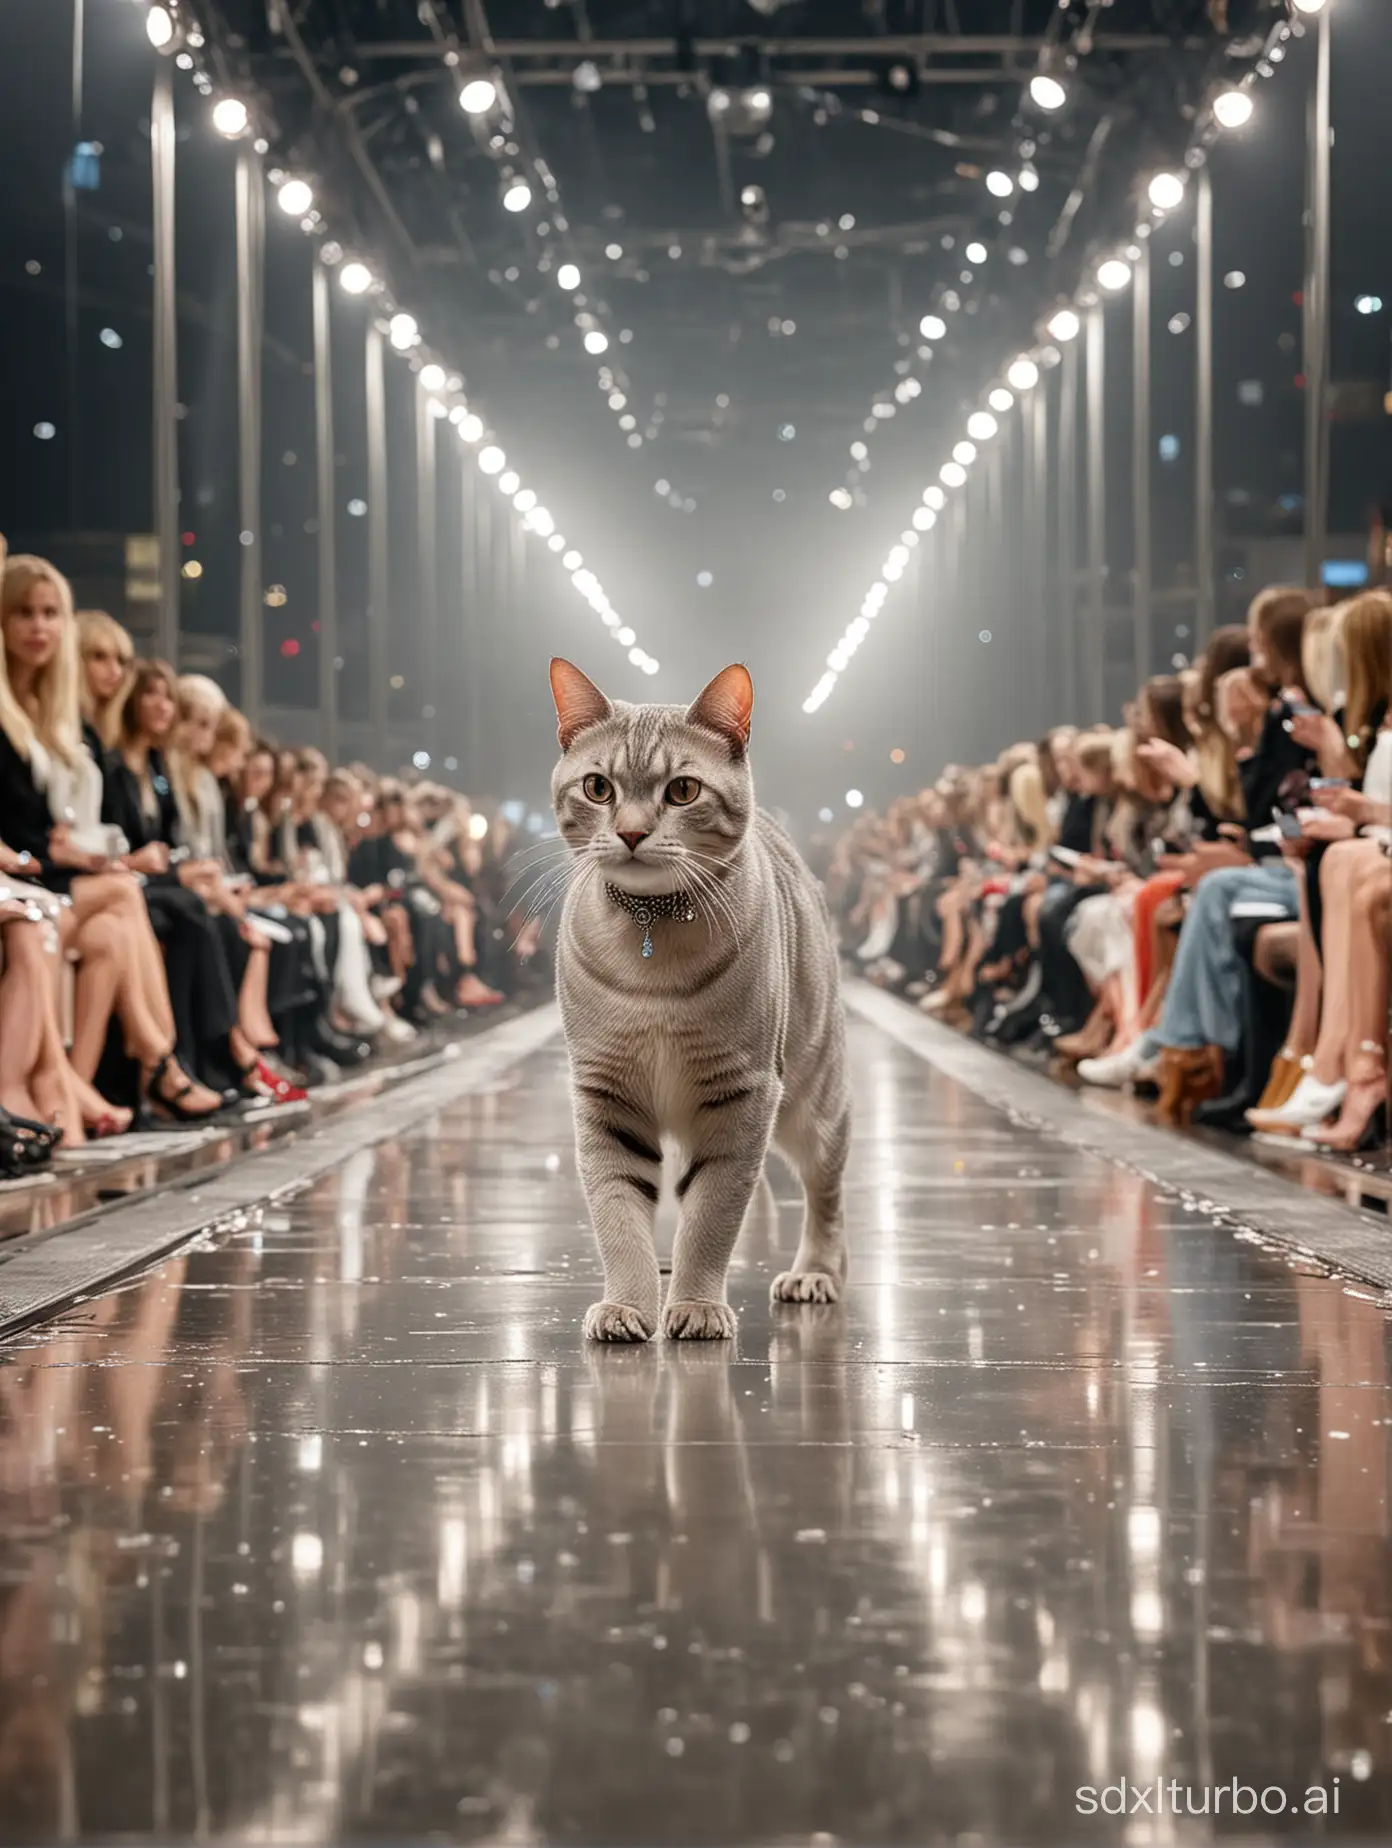 A glamorous fashion show setting for an anthropomorphic cat-themed event. The scene is a long, glittering runway surrounded by dazzling lights. The atmosphere is filled with anticipation and excitement as the audience eagerly awaits the start of the show. The runway is adorned with elegant decorations, reflective surfaces, and a luxurious, modern design, evoking a high-fashion vibe. This image is vertical, optimized for mobile viewing, with a shallow depth of field focusing on the sparkling details of the runway.